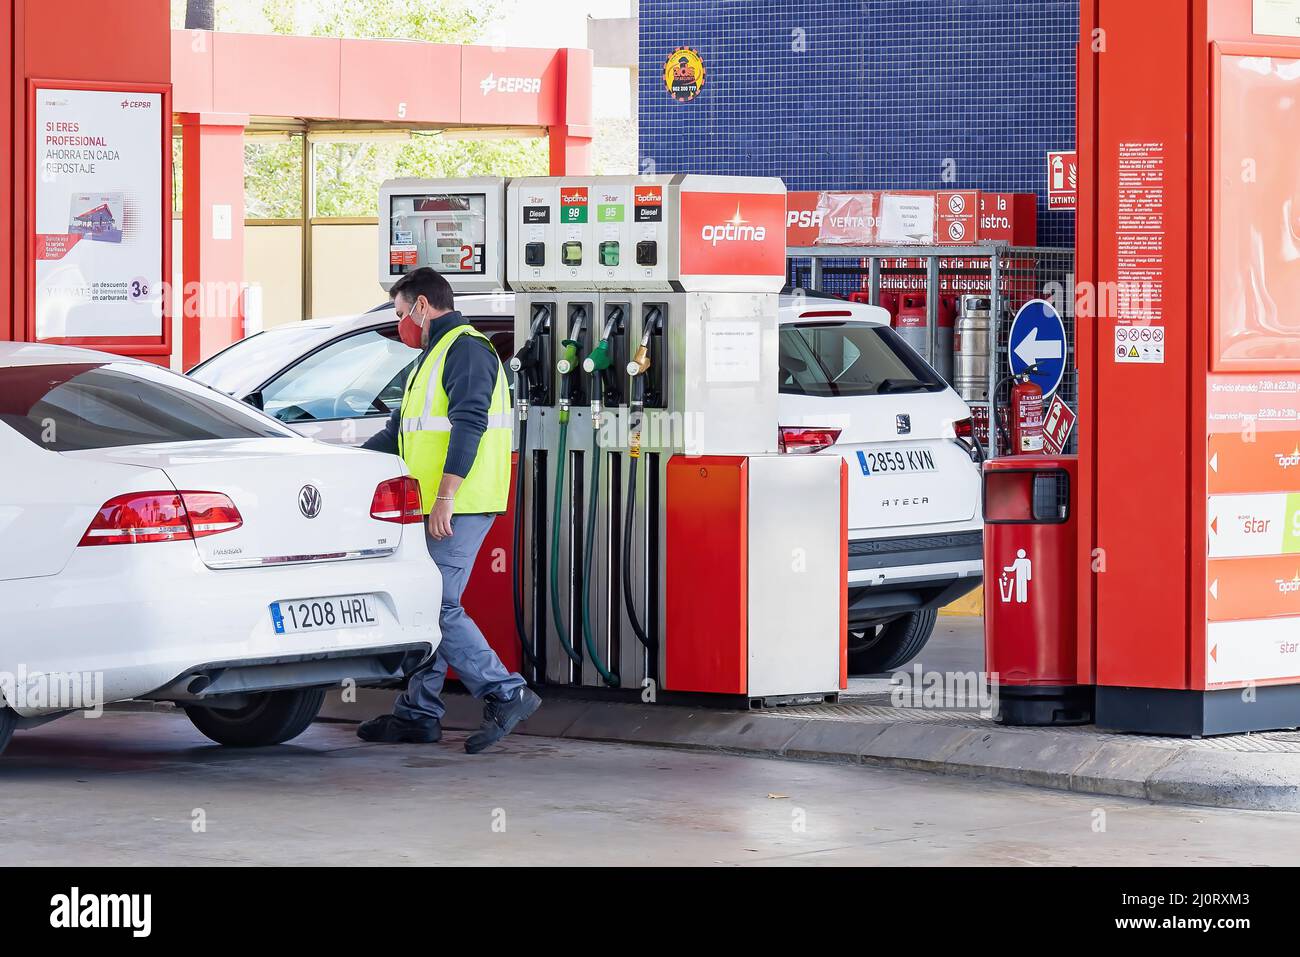 Huelva, Spain - March 10, 2022: View of a petrol pump at a Cepsa gas station with a car that is refueling Stock Photo